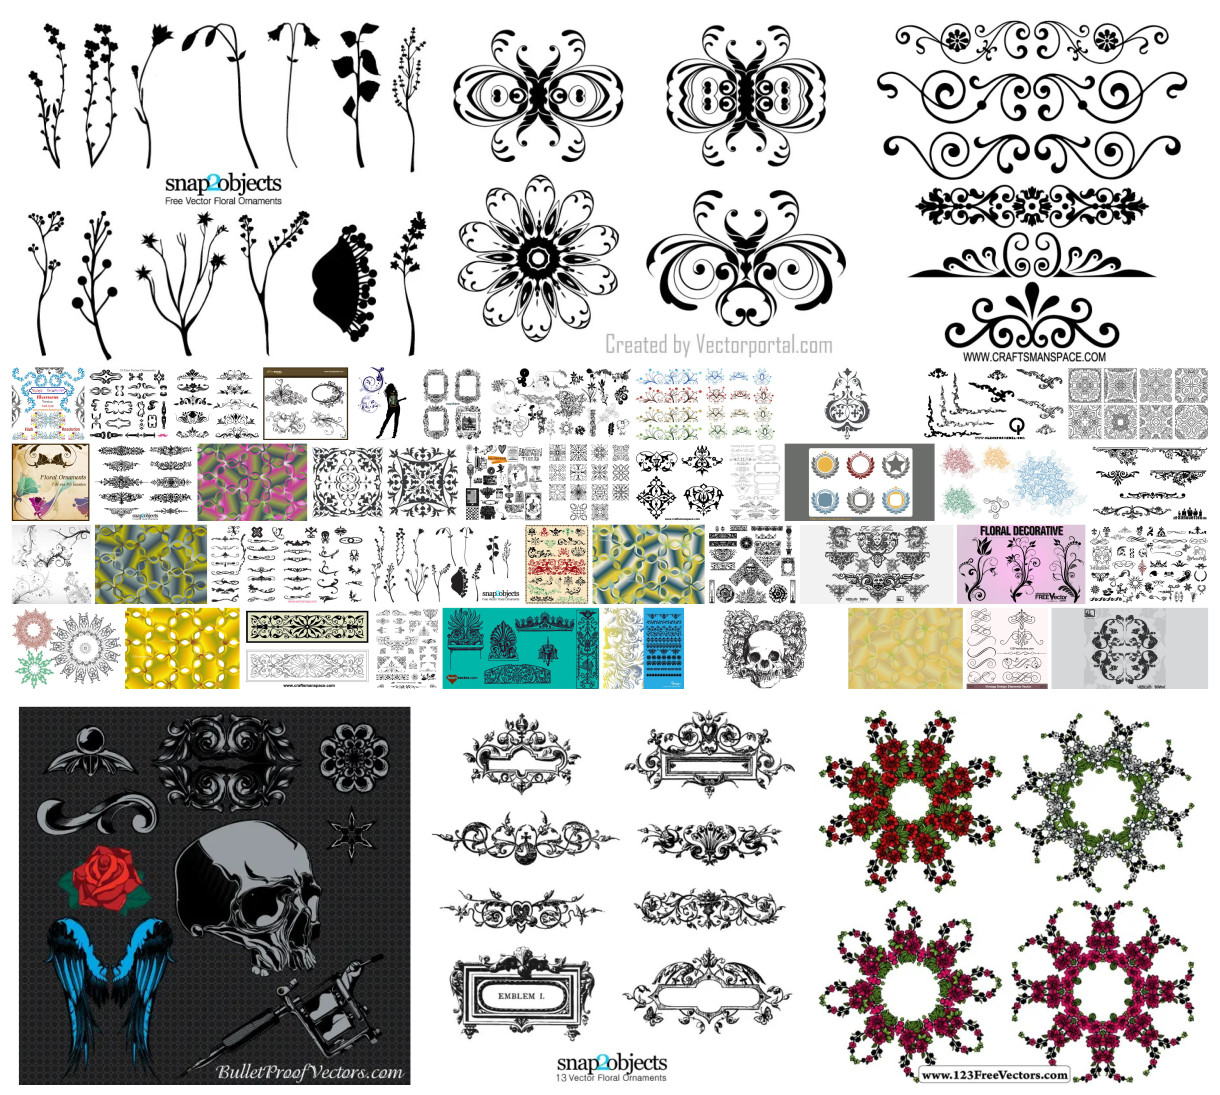 Adorn Your World: A Creative Collection of 40+ Versatile Decorations Vector